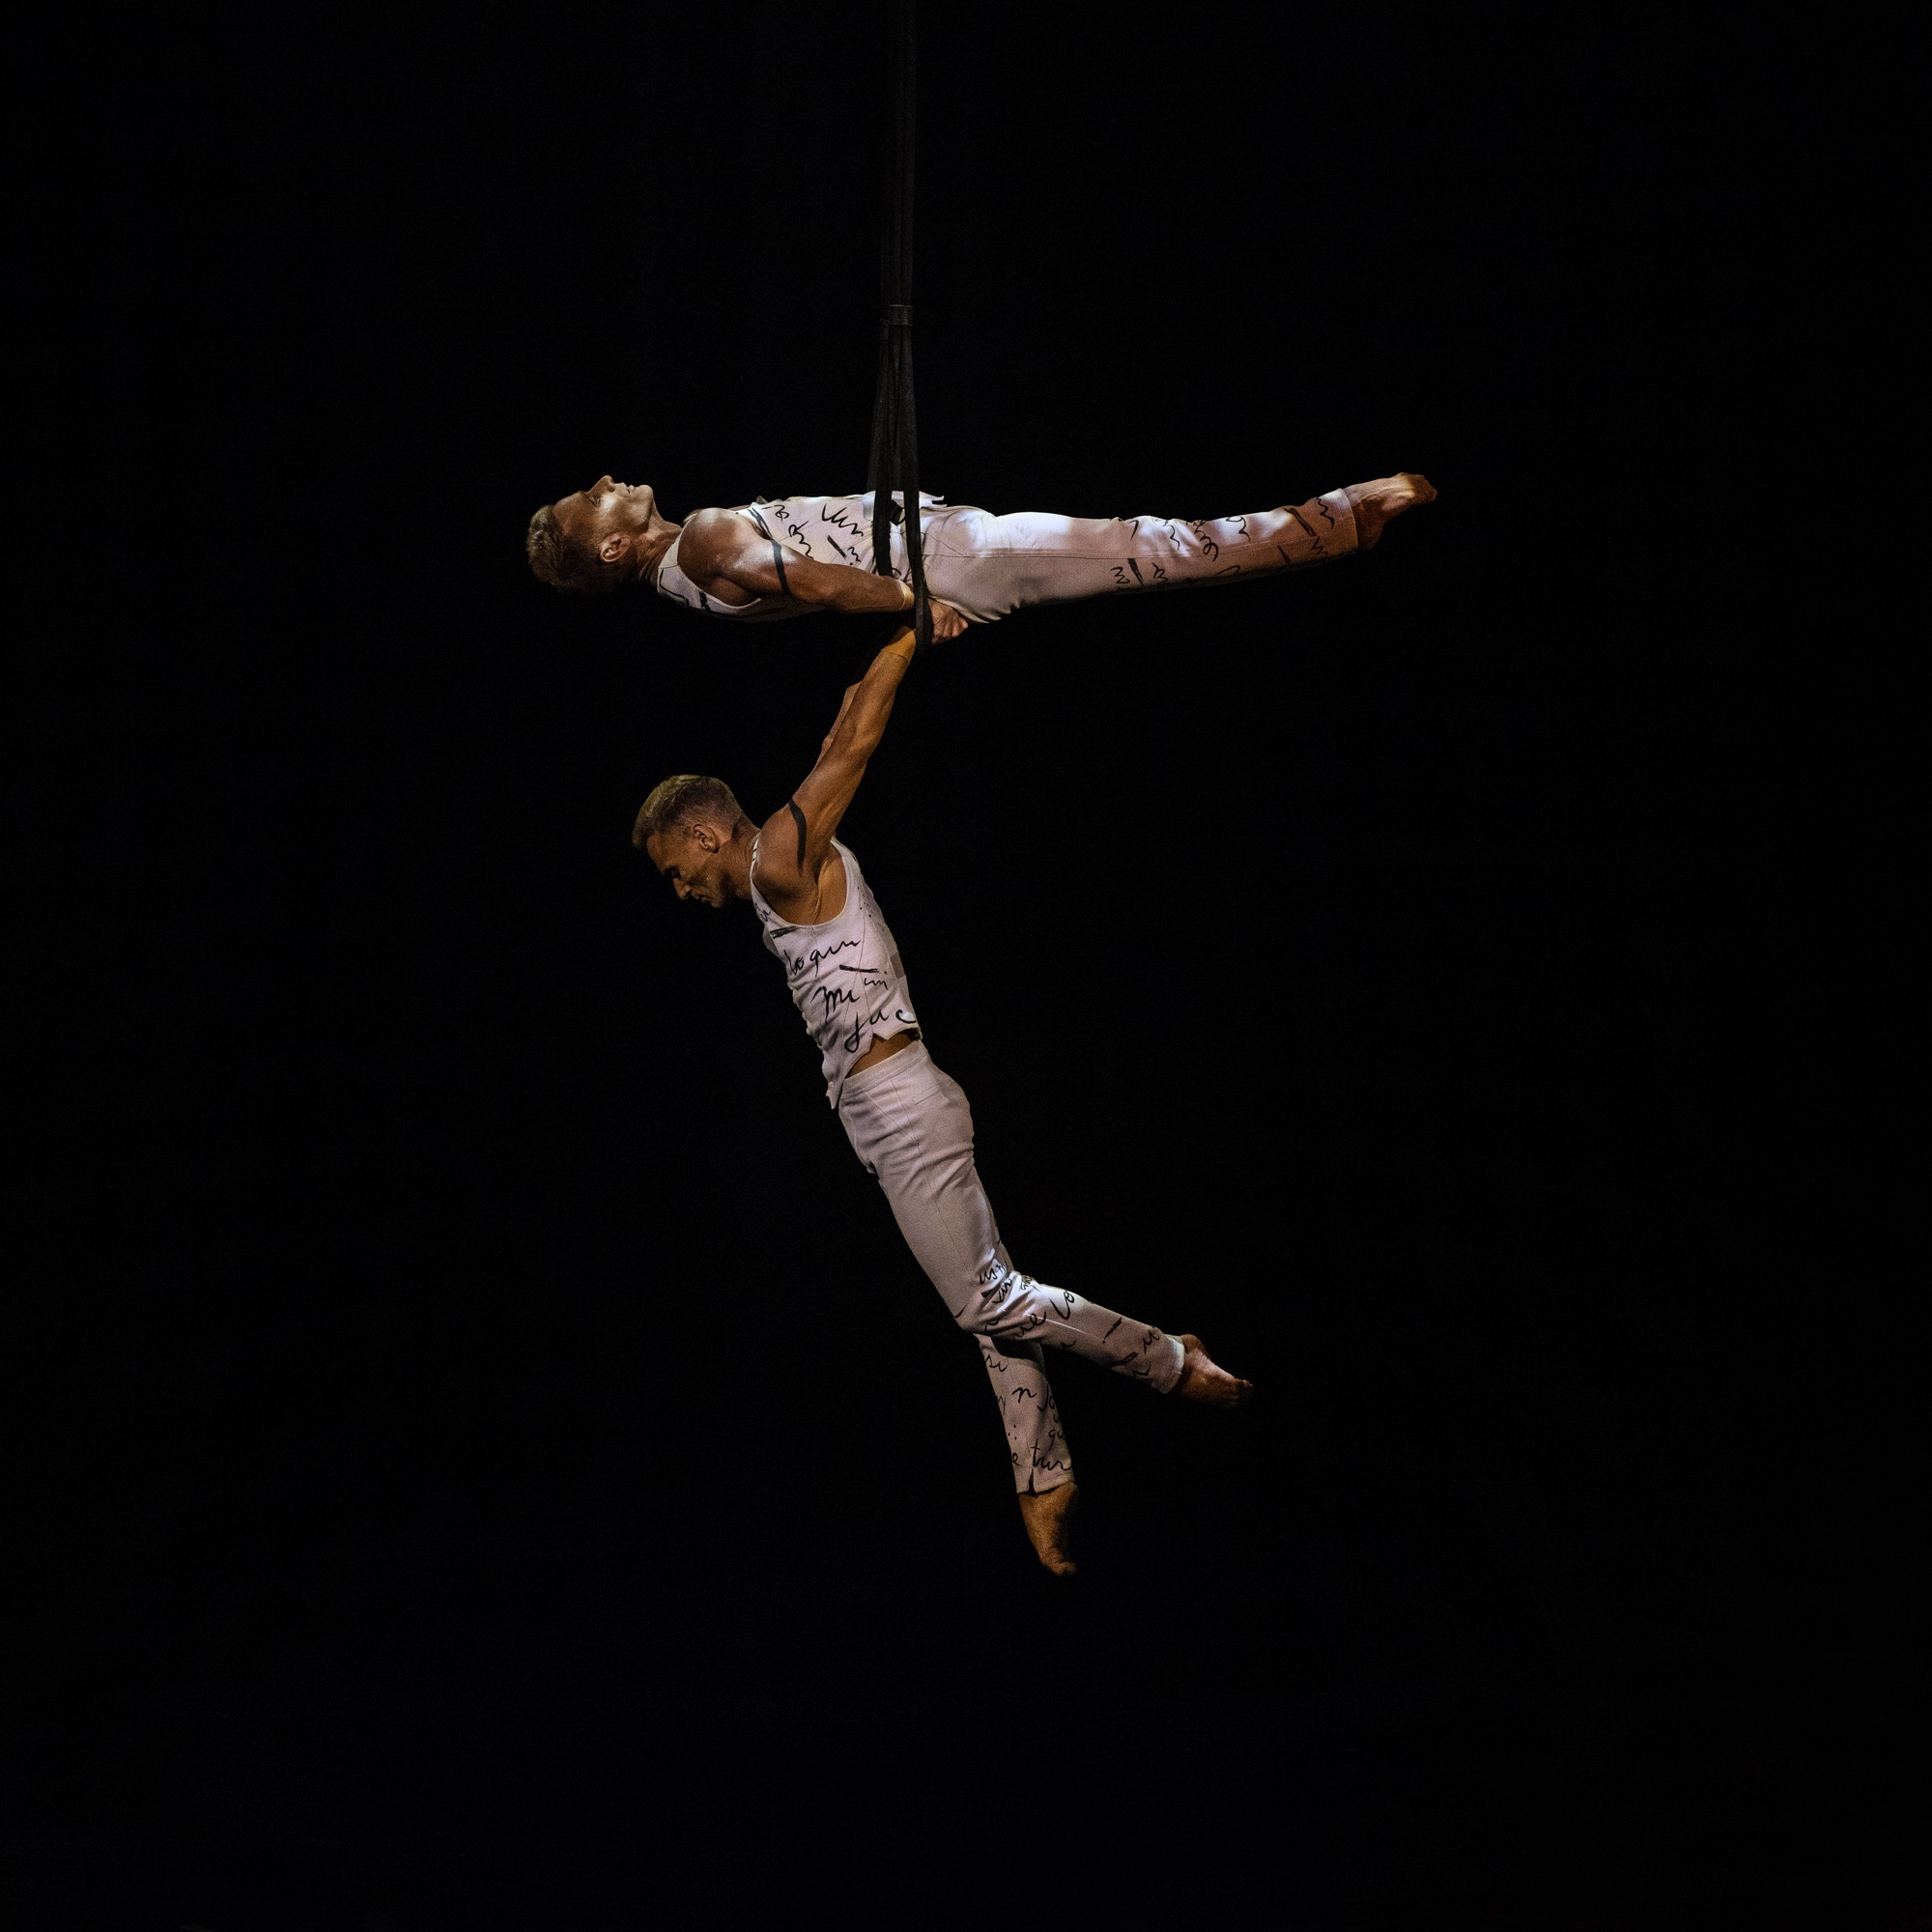 Performing in 'Joya' with Cirque du Soleil - Kevin above and twin Andrew below